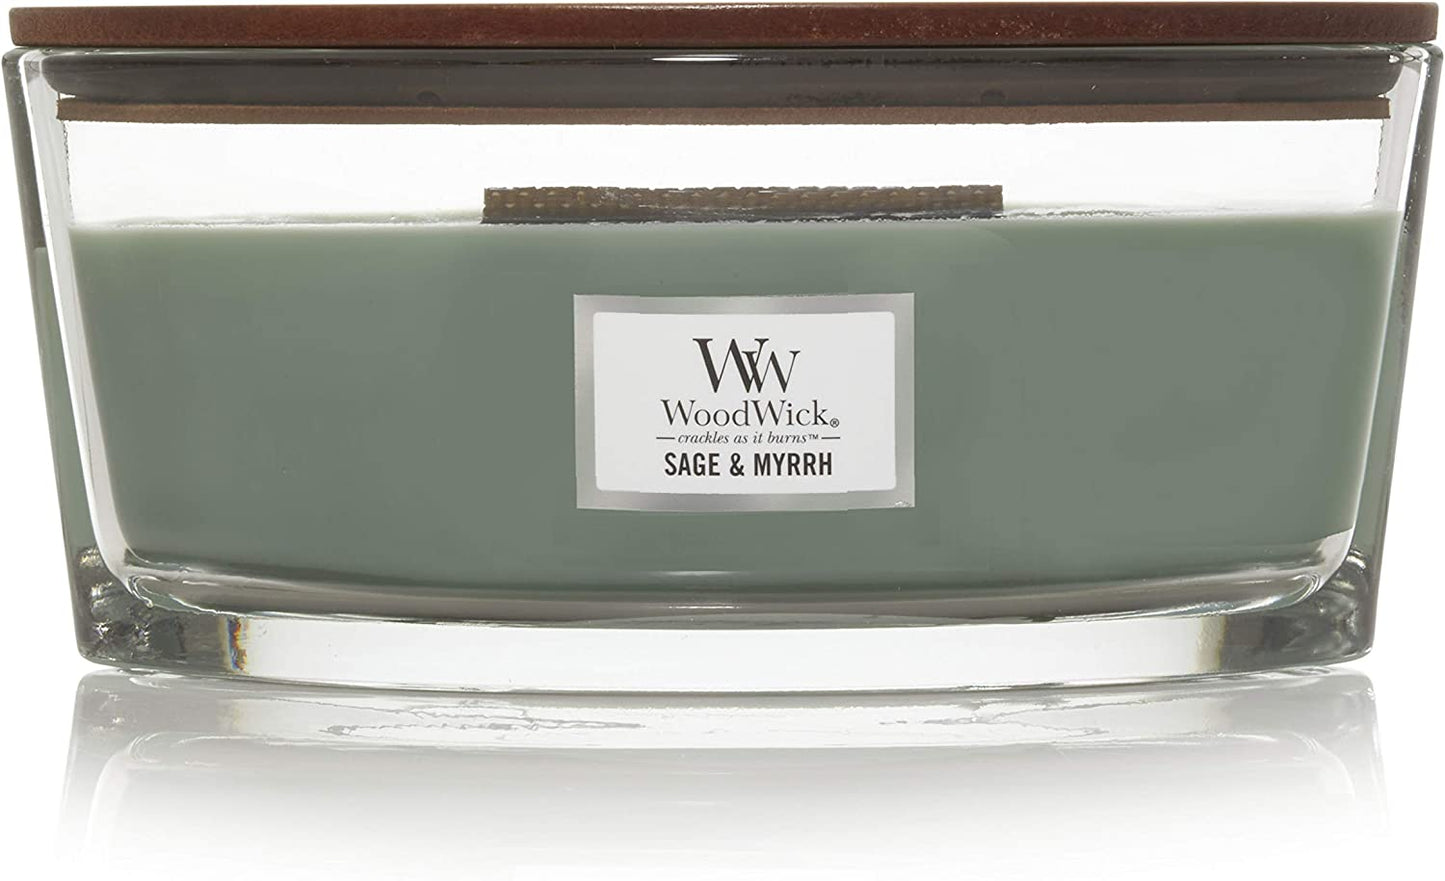 SAGE MYRRH Ellipse HearthWick Flame Scented Candle by WoodWick